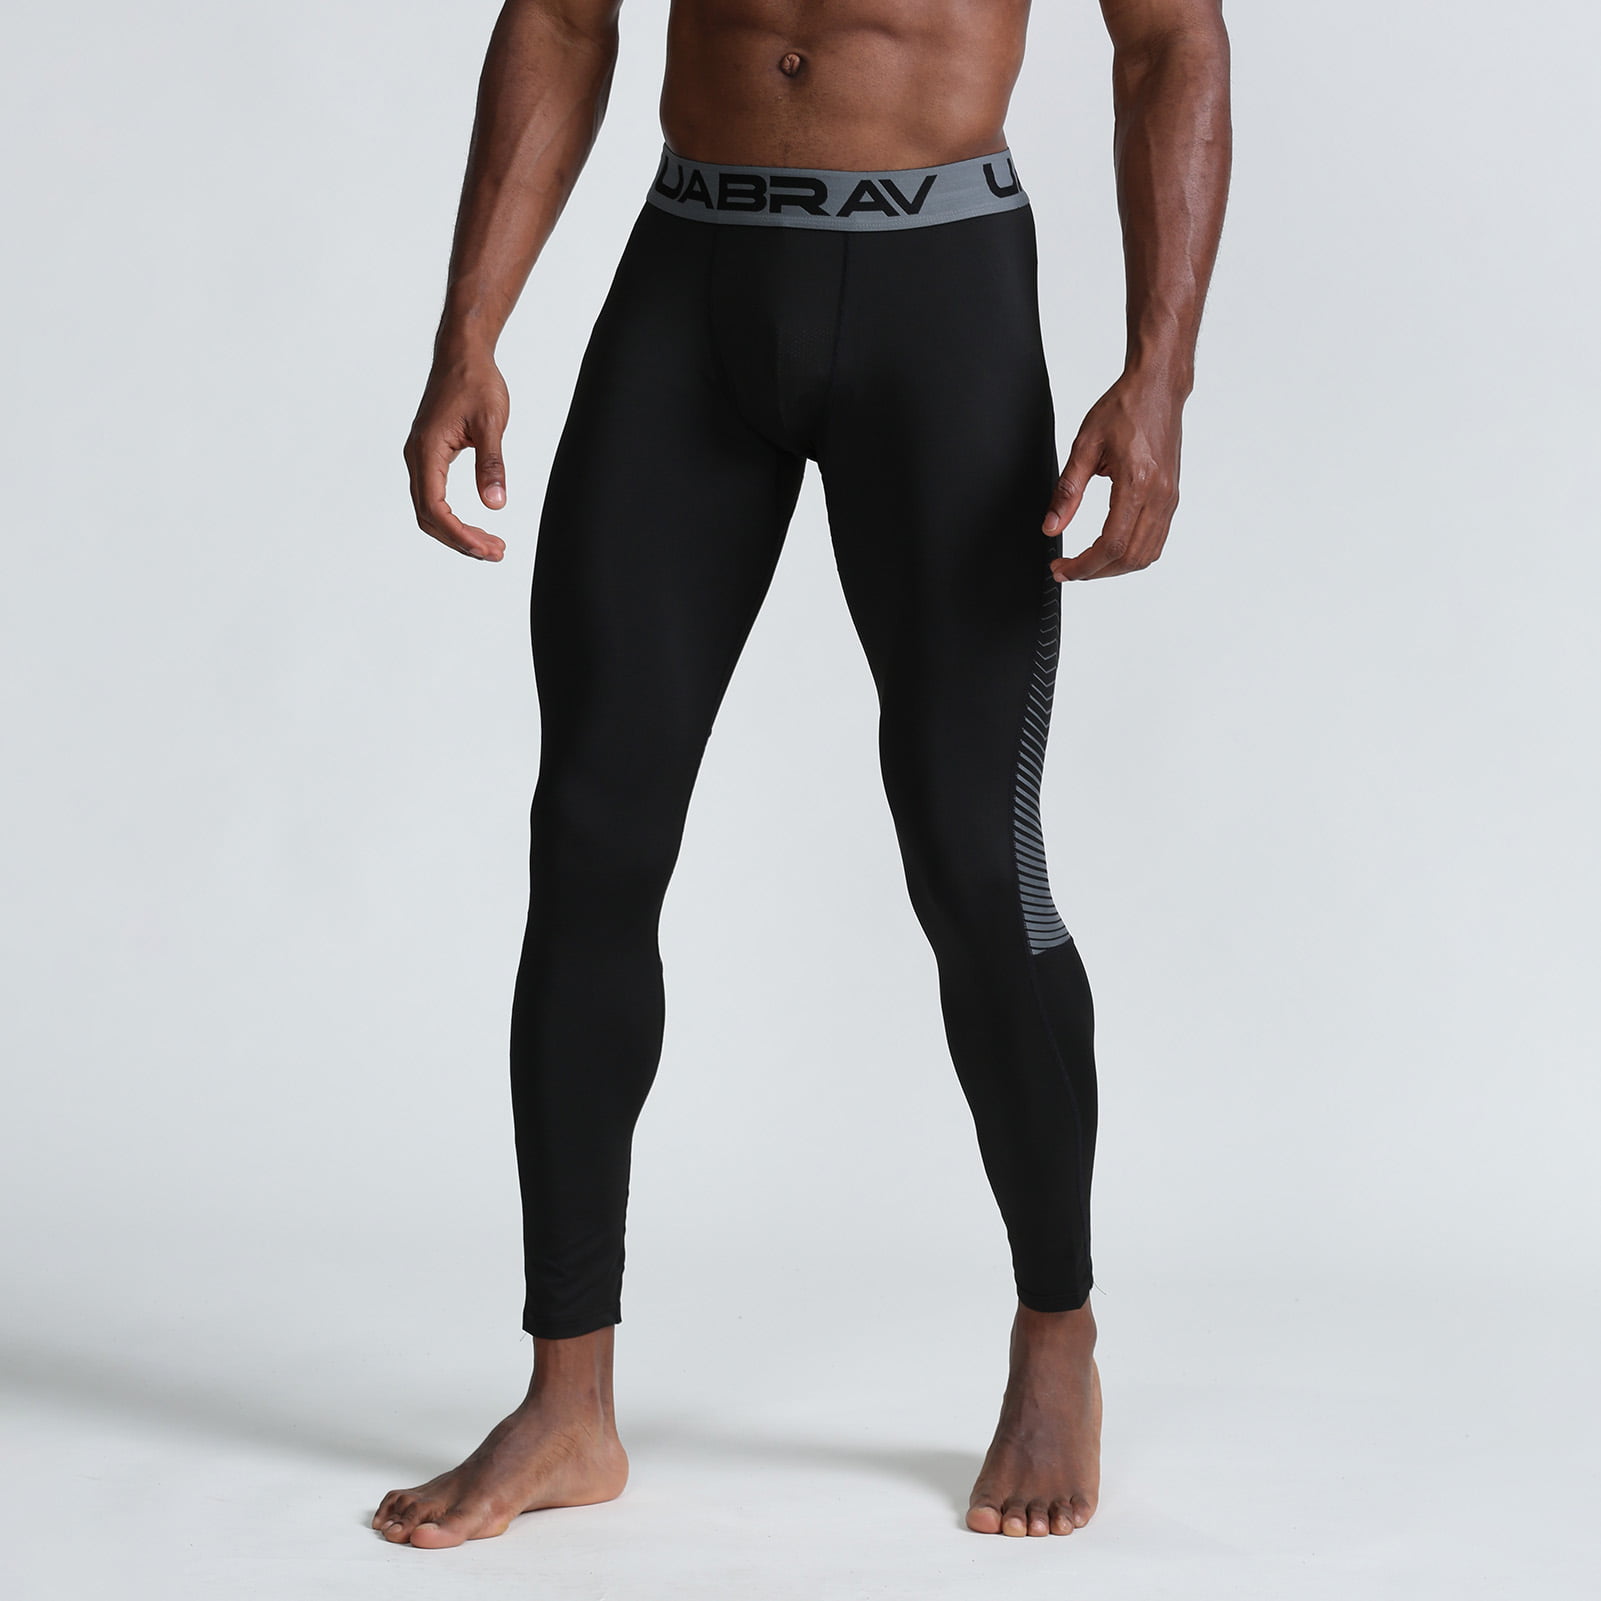 Mens 3/4 Compression Bottoms Running Jogging Gym Trousers Dri fit Breathable 